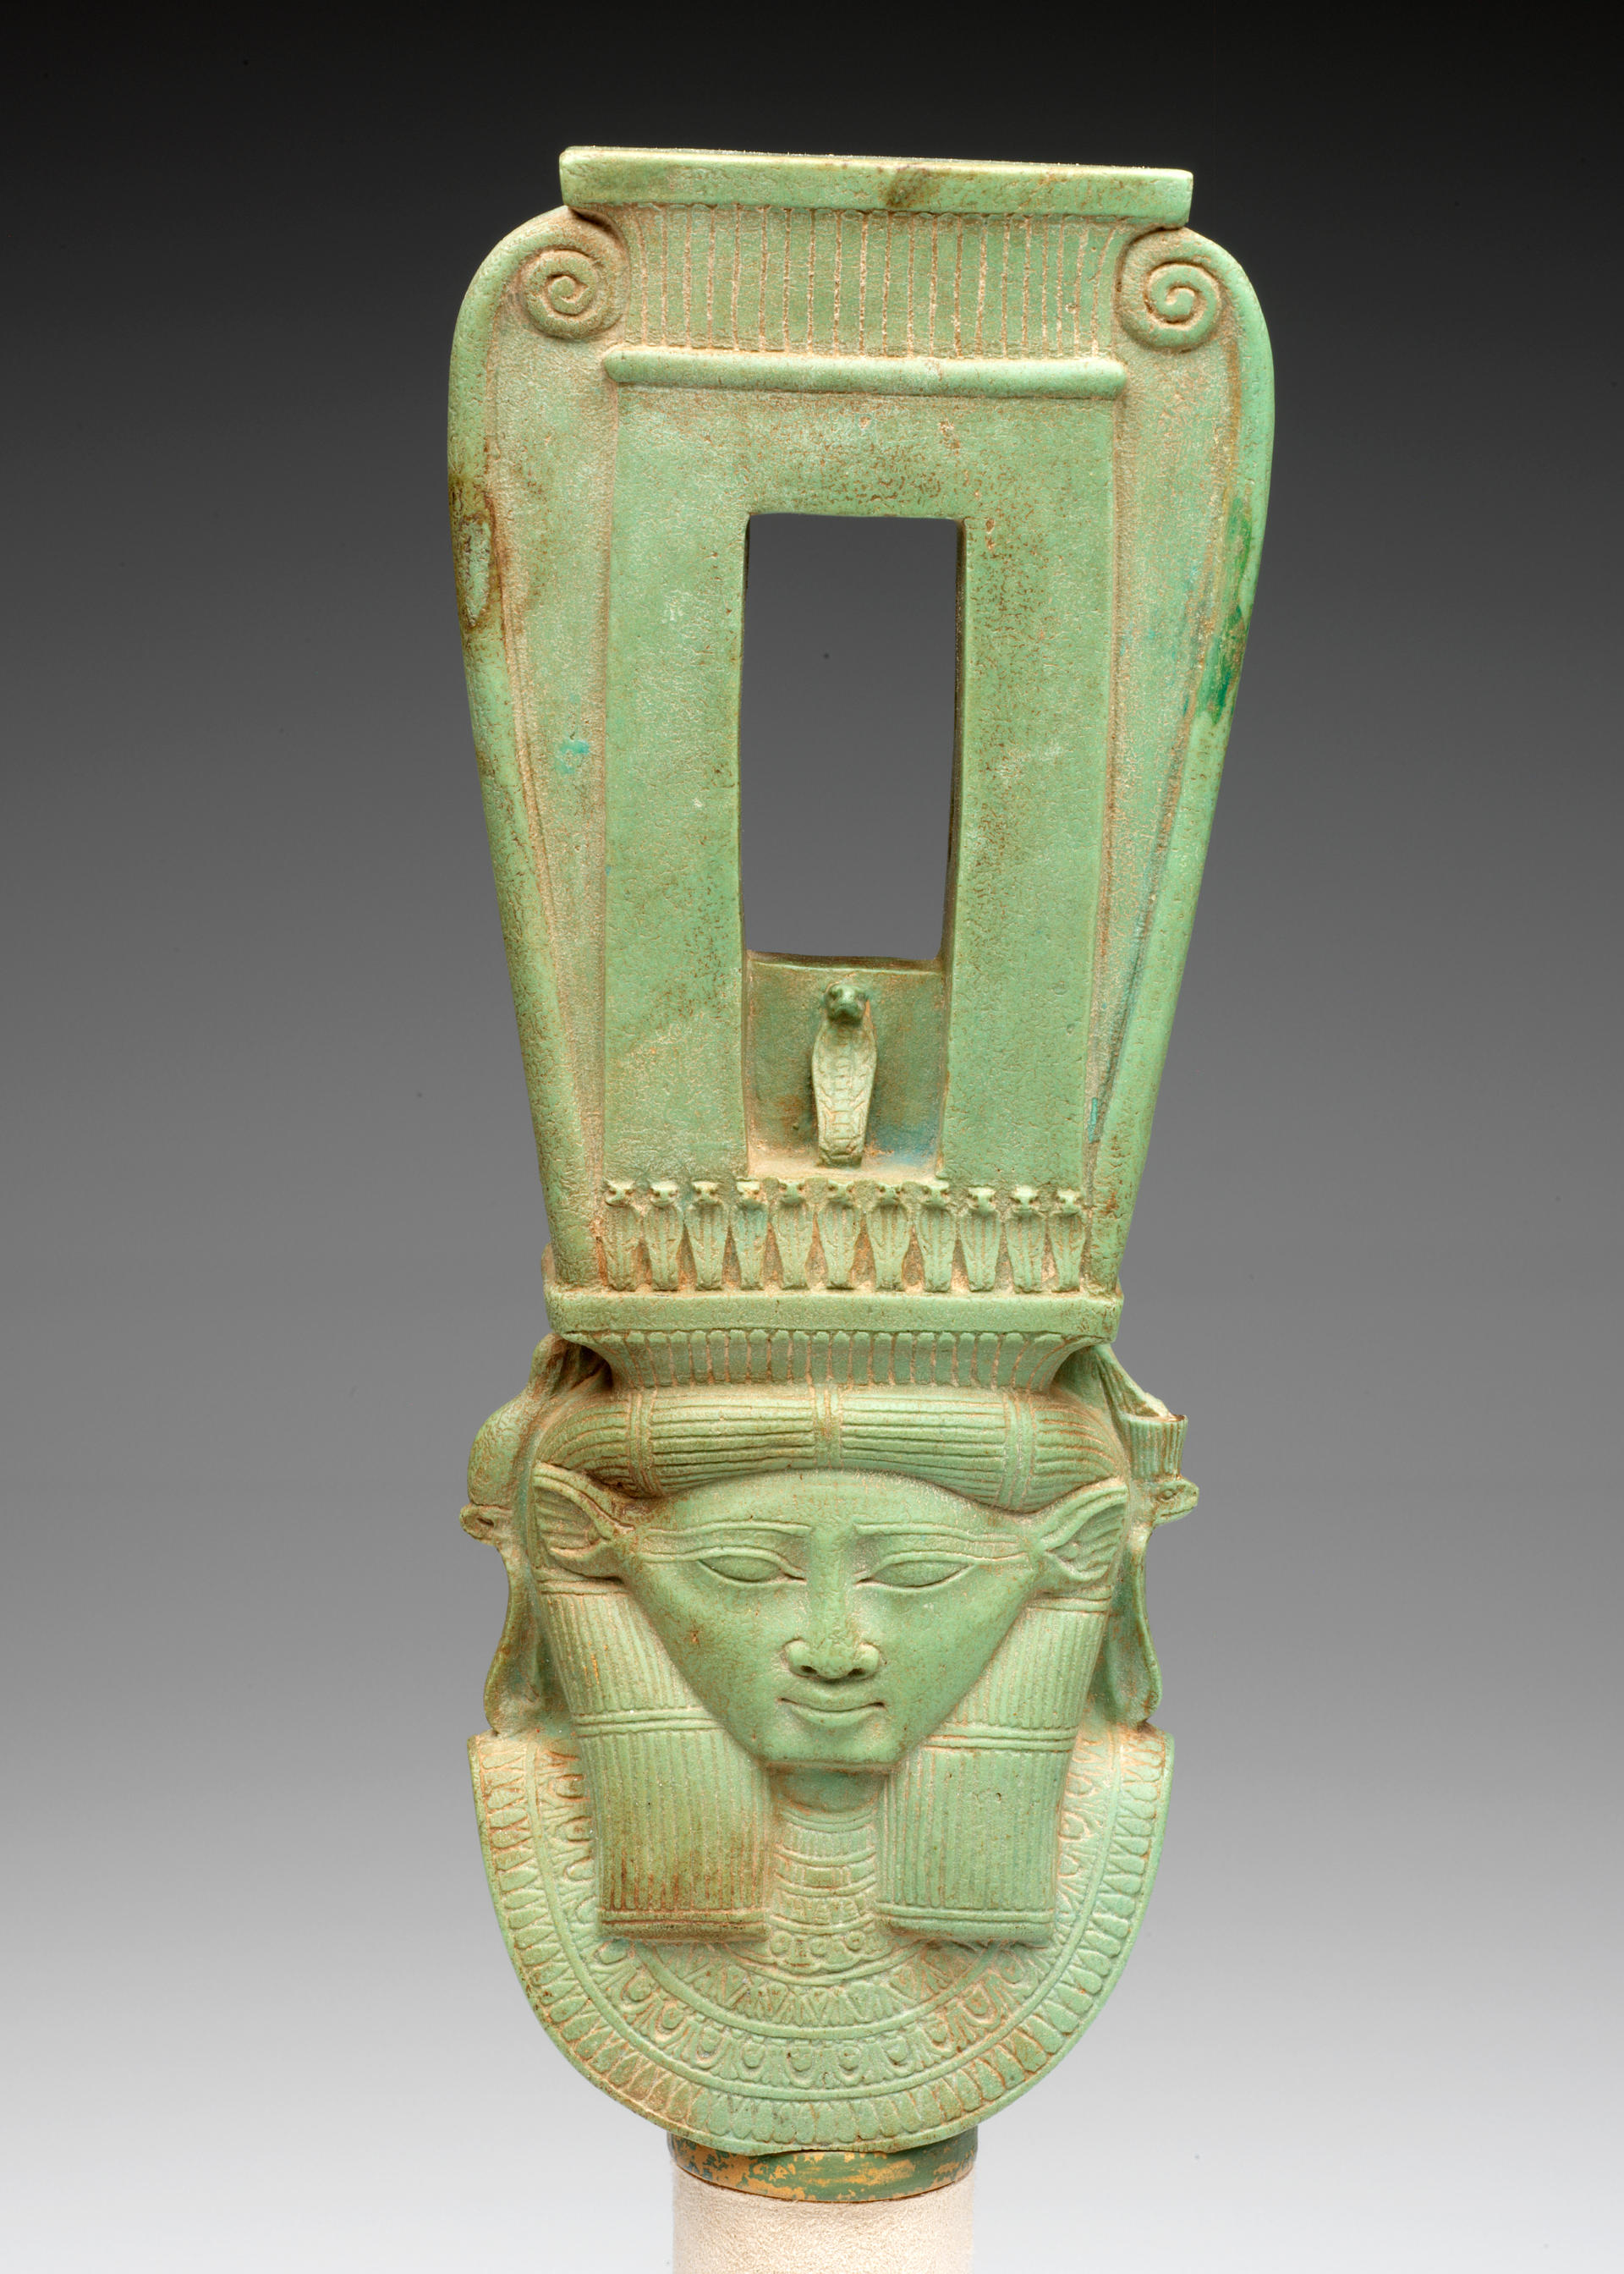 Front view of a long jade-green sculpture of a collared figure wearing a tall headdress, which has a rectangular opening and swirls on the outer edges forming a curved top.